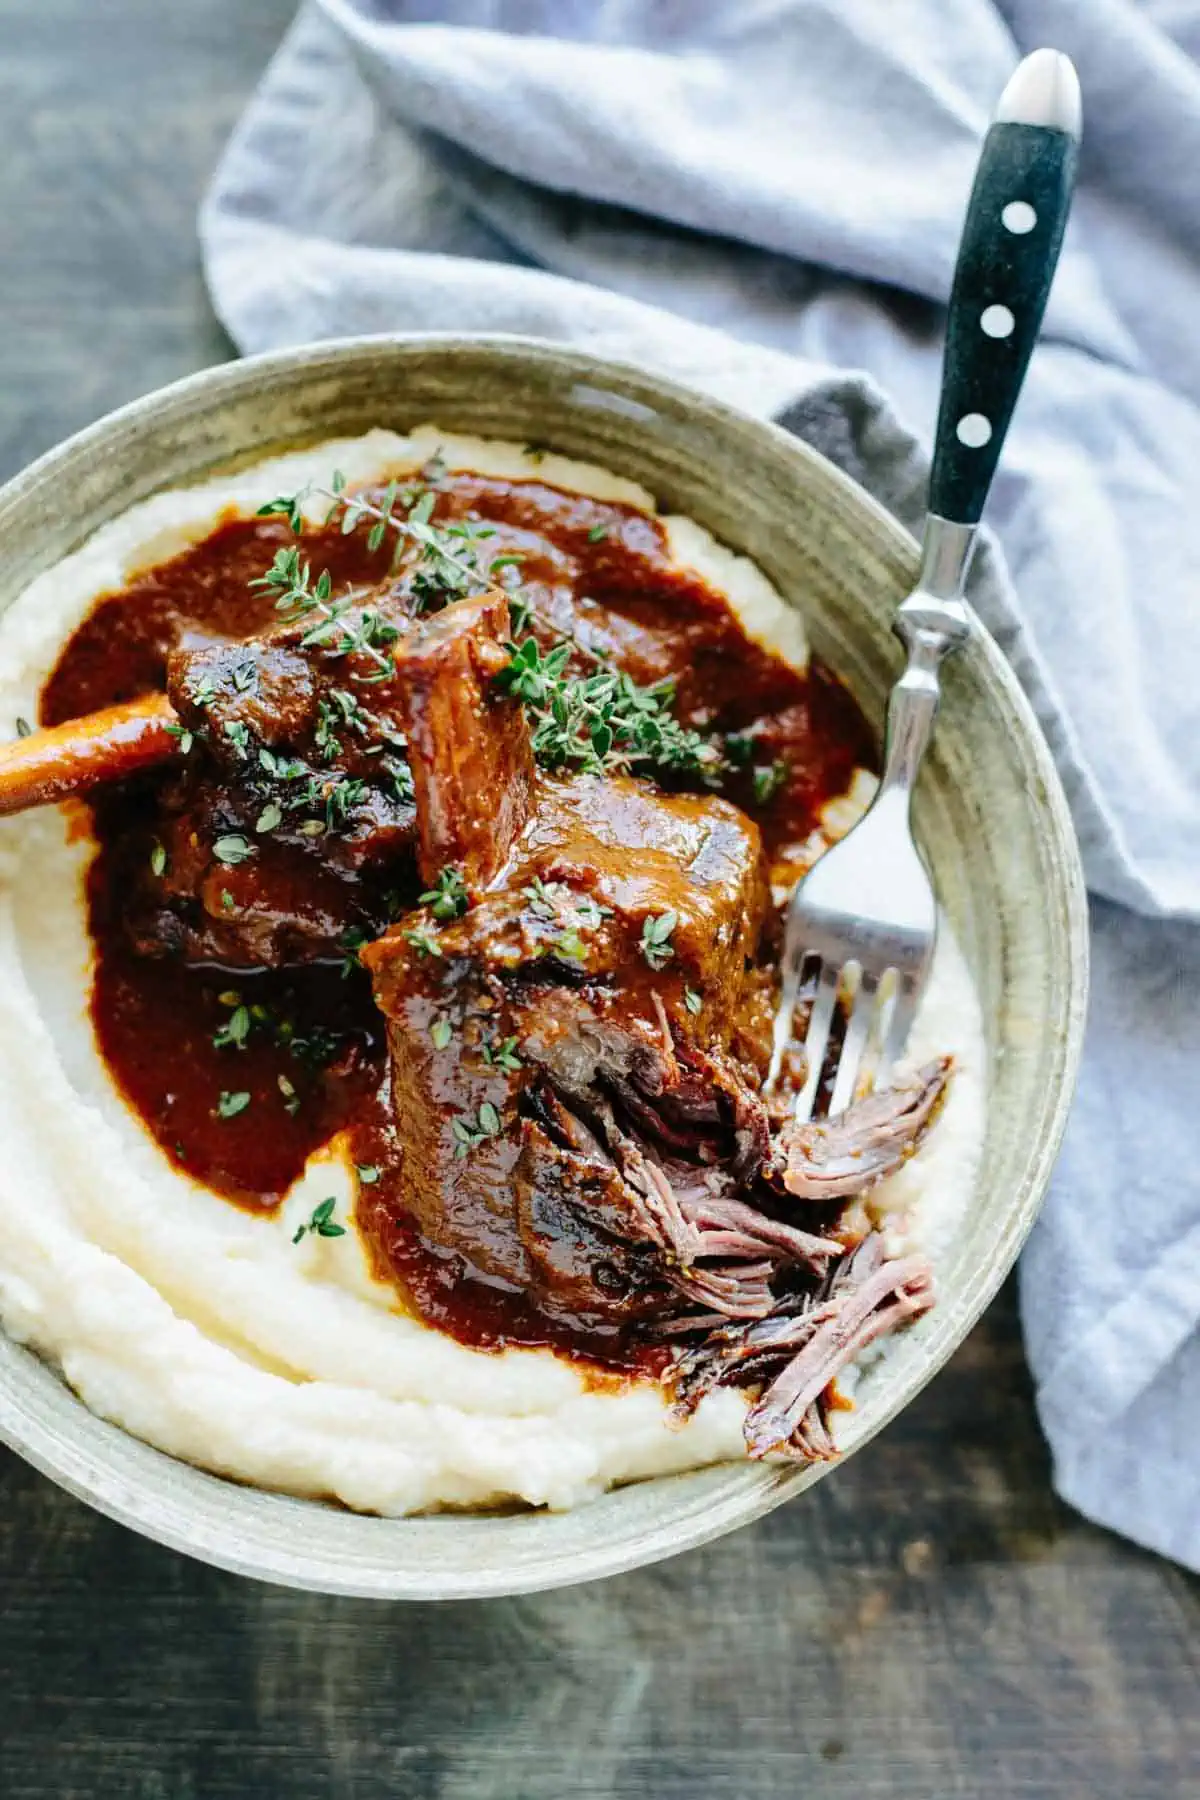  Red Wine Braised Short Ribs with Parsnip Celery Root Puree